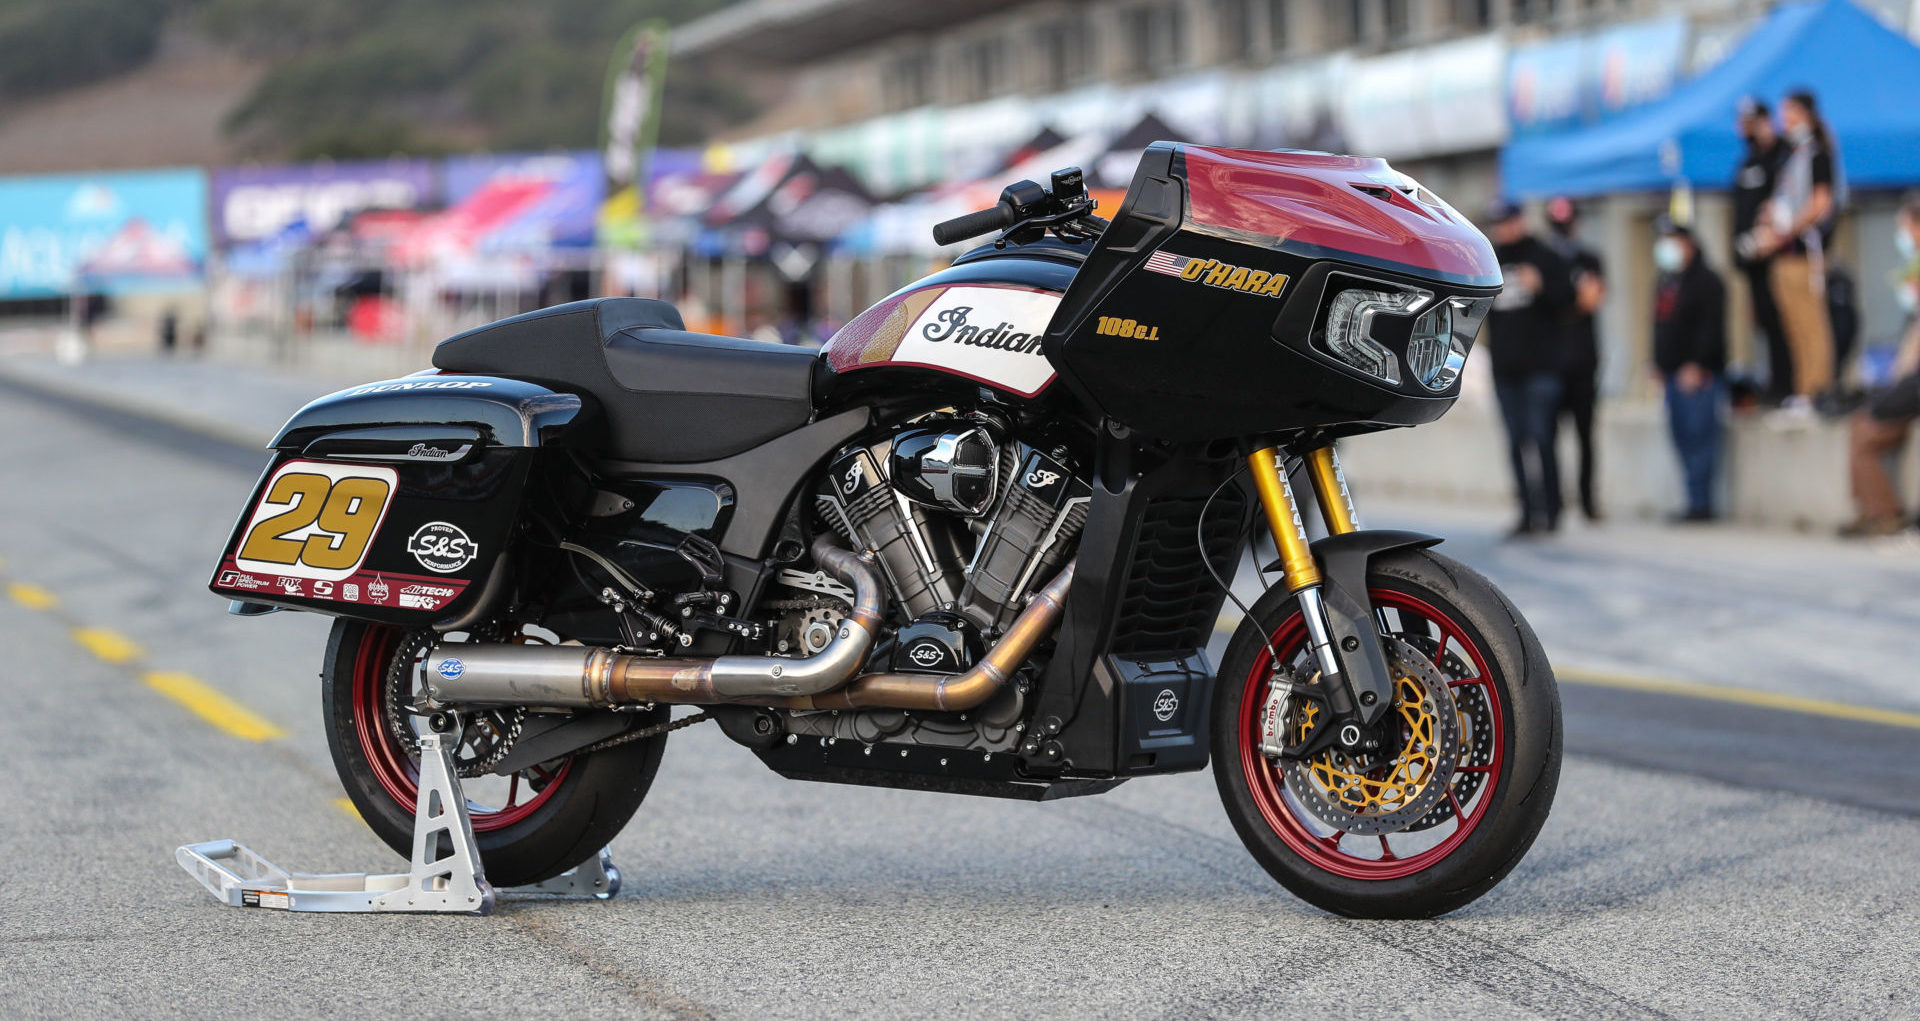 Tyler O'Hara's S&S Indian Challenger MotoAmerica King of the Baggers racebike. Photo by Brian J. Nelson.